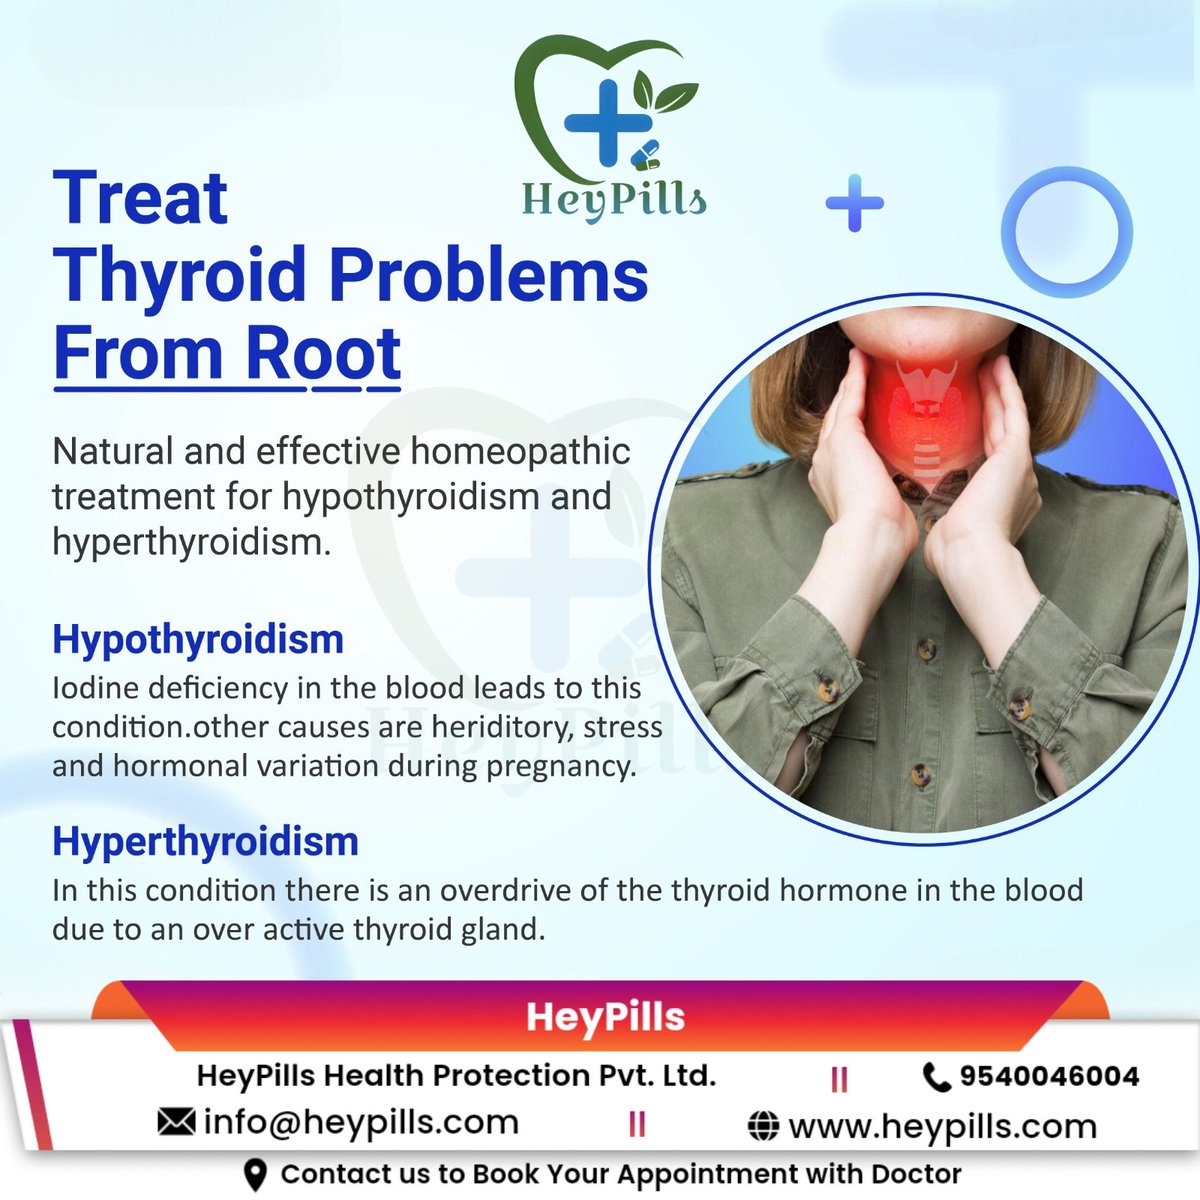 TREAT #THYROID PROBLEMS FROM ROOT
Book our #Online #Consultation Now
+91 9540046004

#HeyPills #homeopathy #homeopathyheals #homeopathicmedicine #homeopathic #homeopathyworks #homeopathyforall #homeopathytreatment #treatment #skincare #skin #clinic #health #hairtreatment #doctor